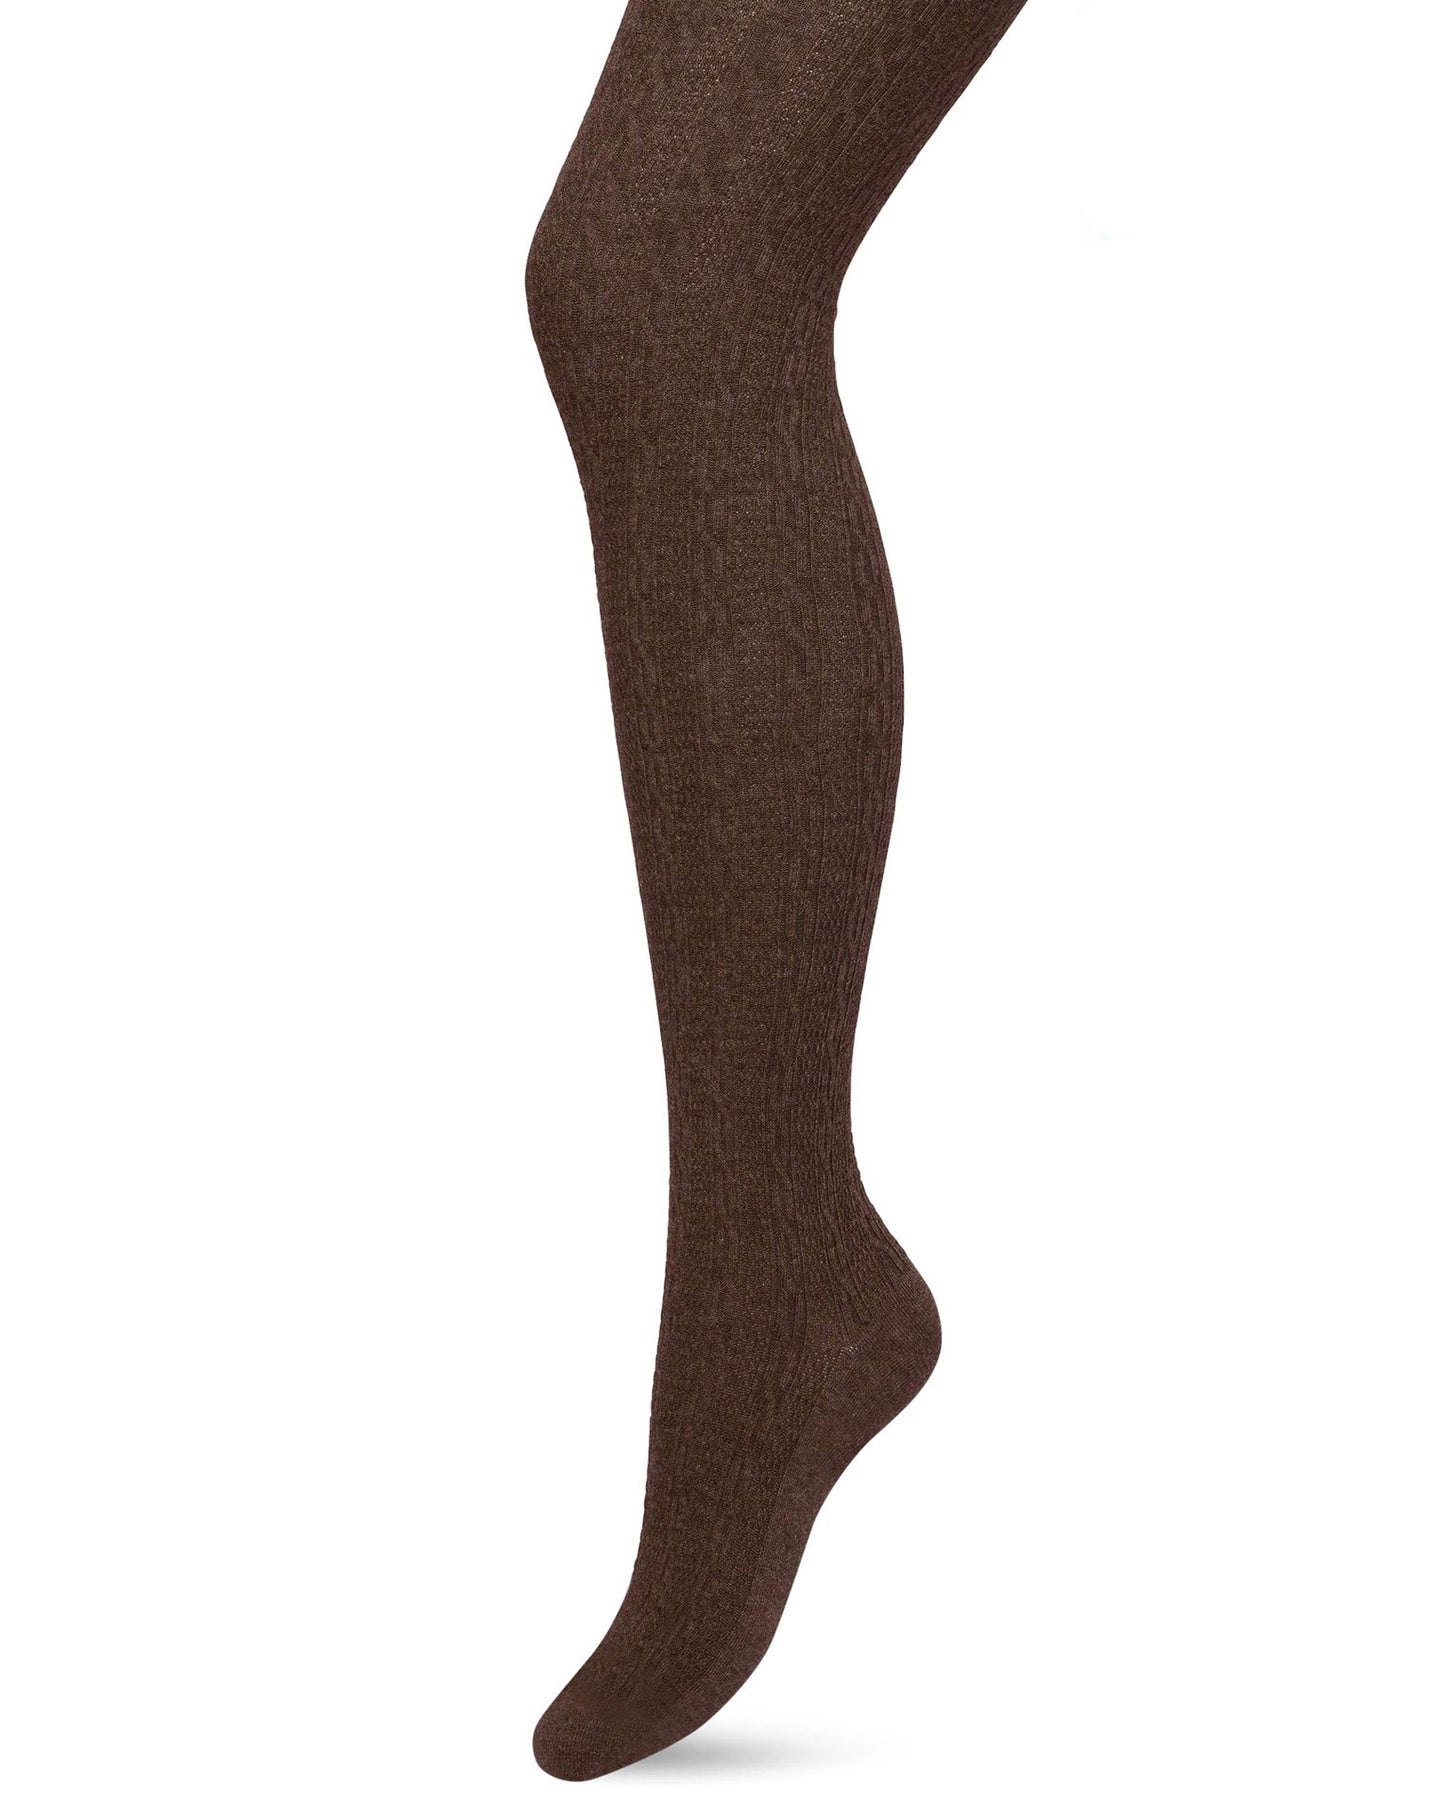 Bonnie Doon Classic Cable Tights - Brown (shopping bag) organic cotton knitted tights with a cable knit style ribbed pattern, flat seams, gusset, high waist, shaped heel and flat toe seam.